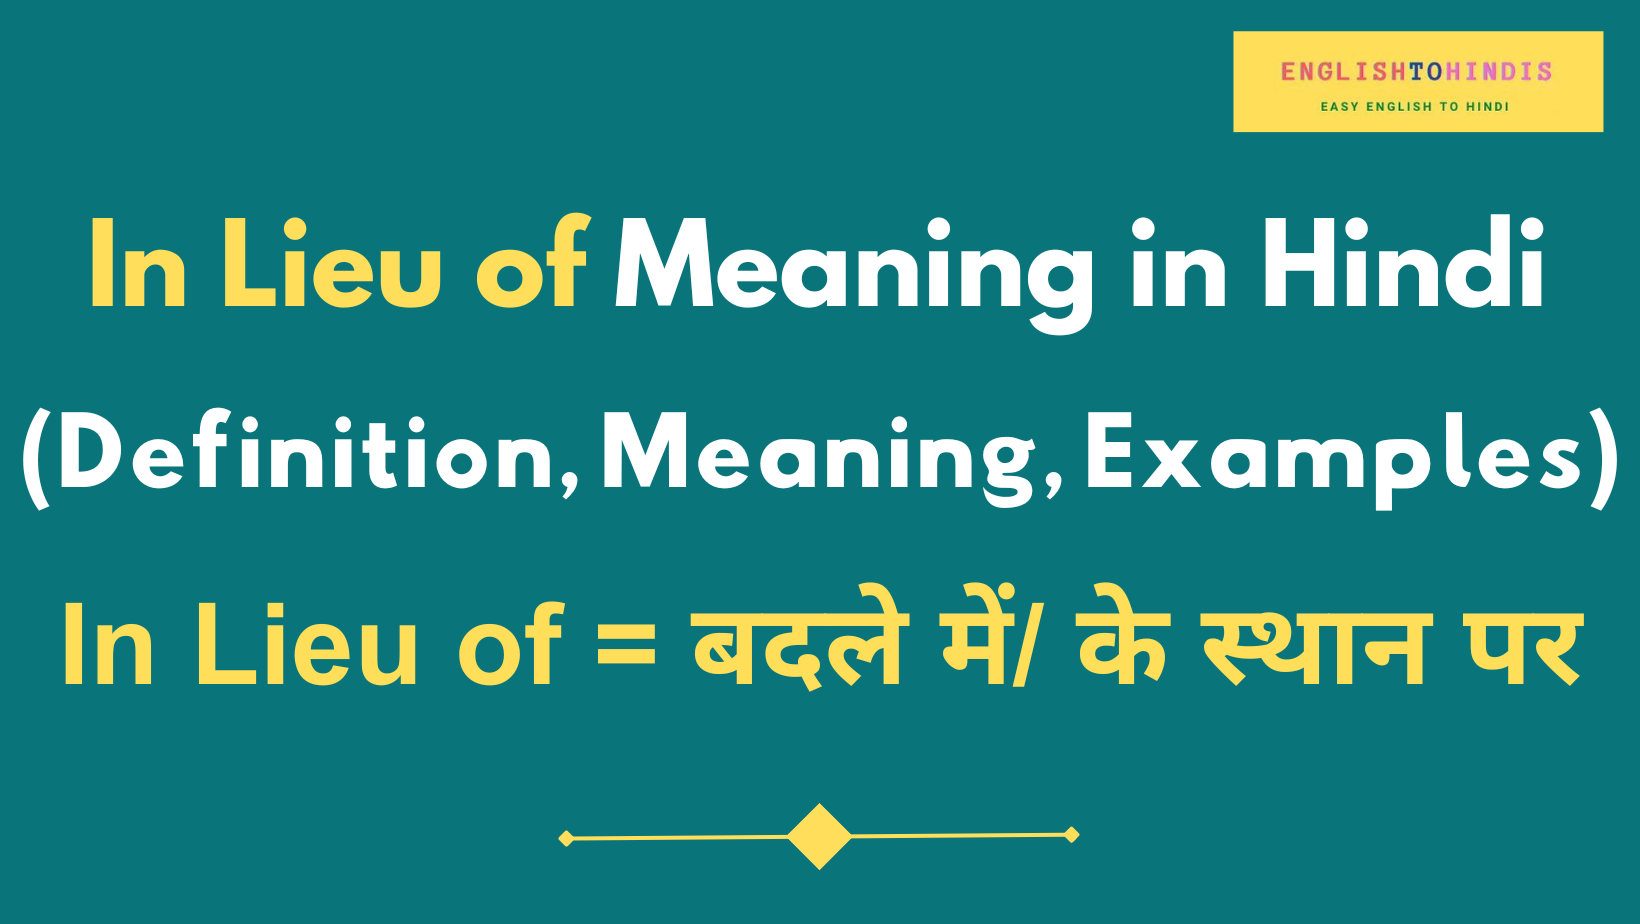 In Lieu of Meaning in Hindi